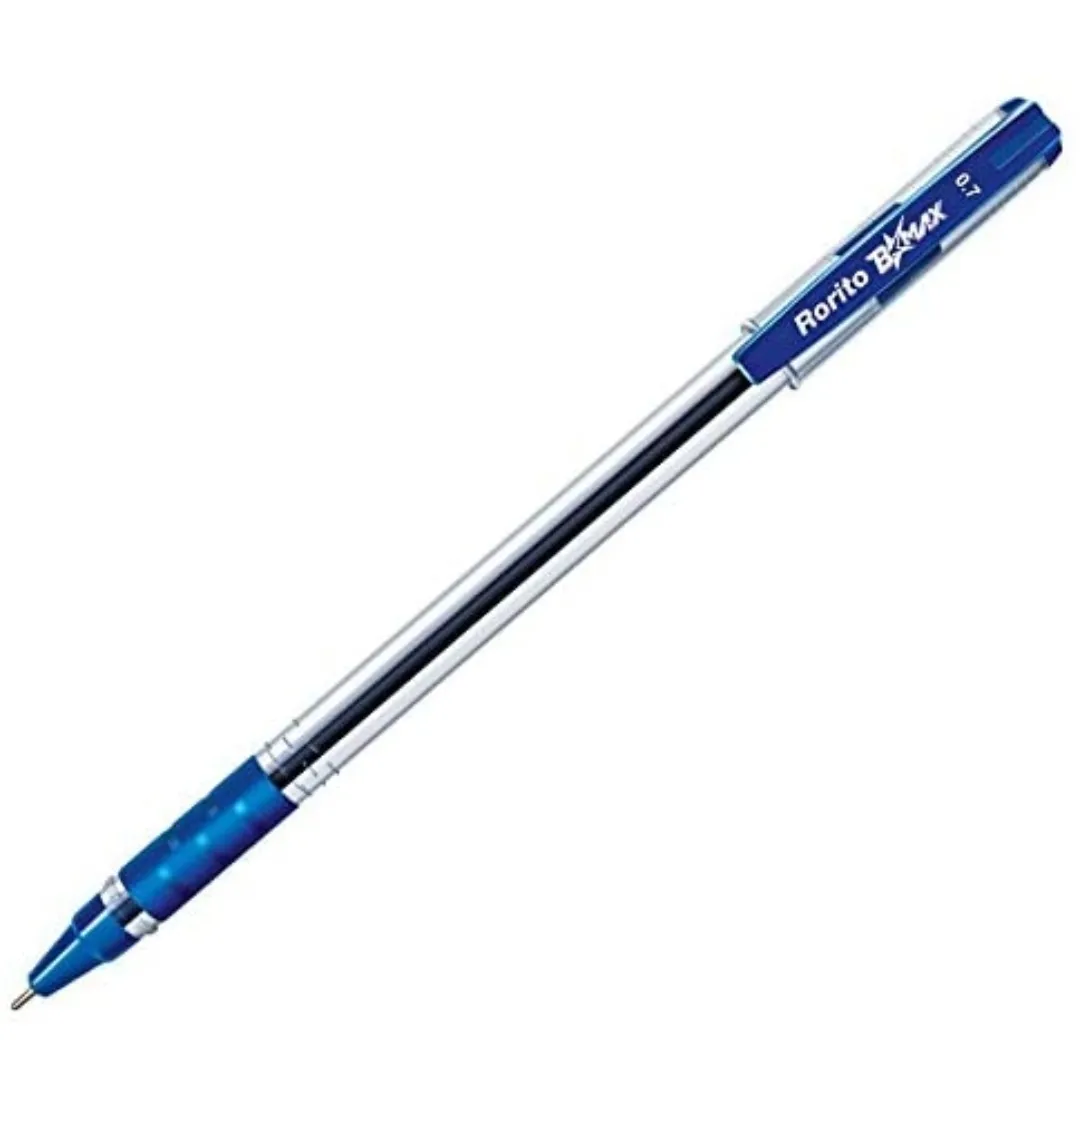 Rorito B Max Ball Point Pen - Pack of 5 (Blue)